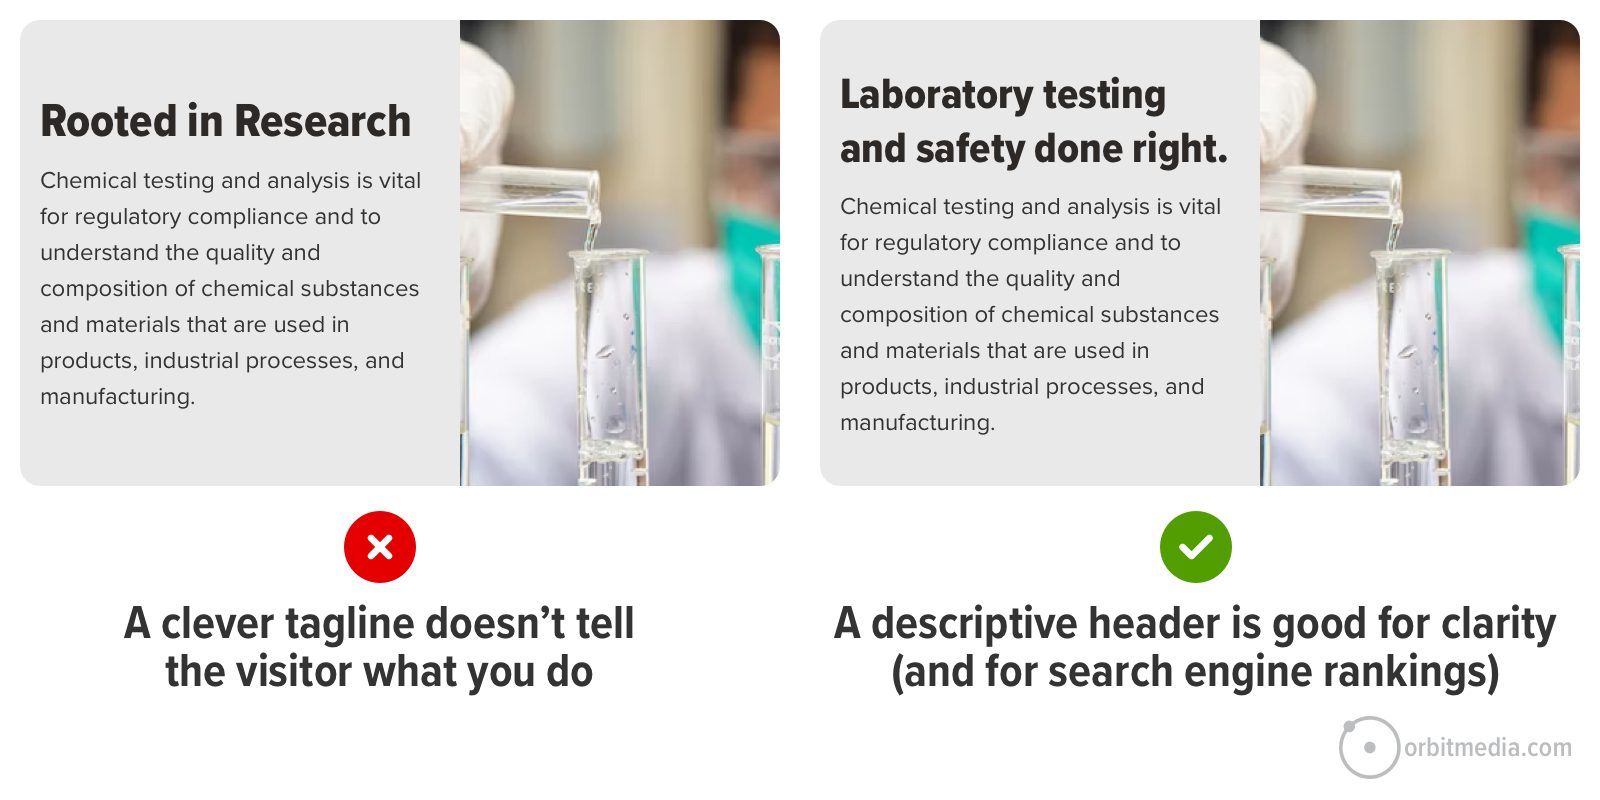 Two images comparing taglines. Left: "Rooted in Research" with a red 'x'. Right: "Laboratory testing and safety done right." with a green checkmark. Below: emphasizes clarity in descriptions for SEO benefits.